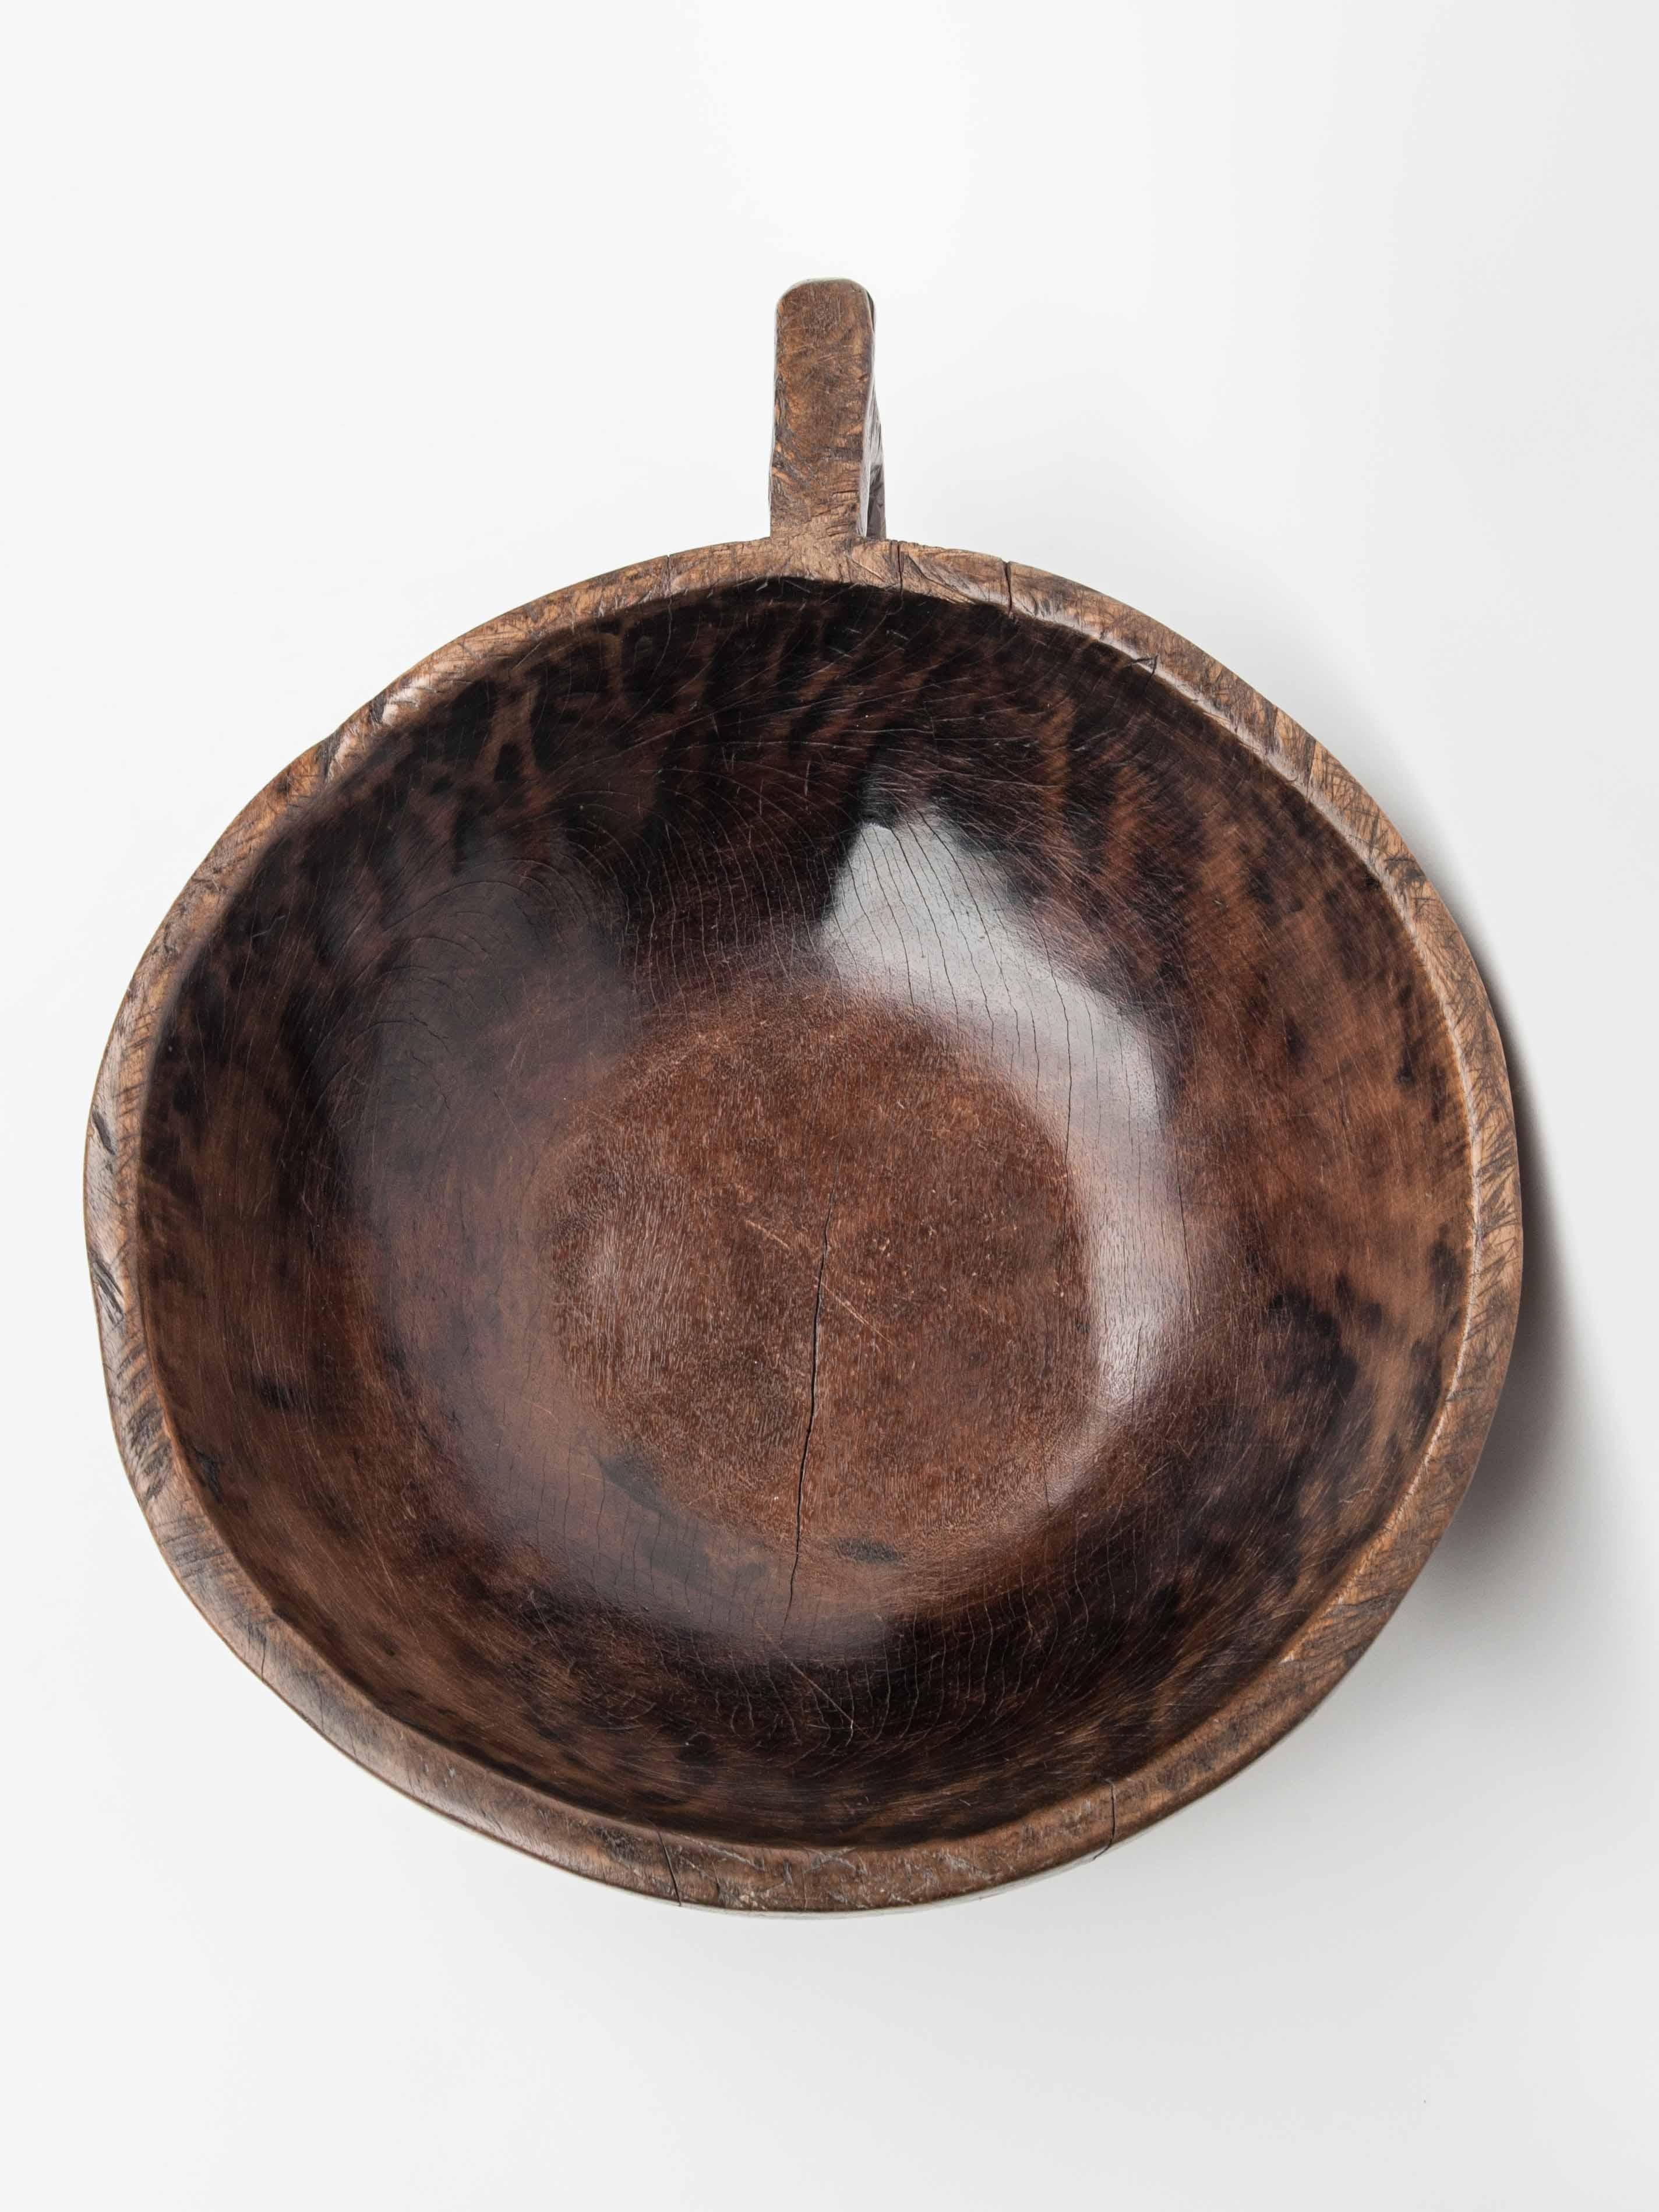 Hardwood Hand Hewn Wooden Bowl with Handle Sulawesi, Indonesia. Mid-Late 20th Century